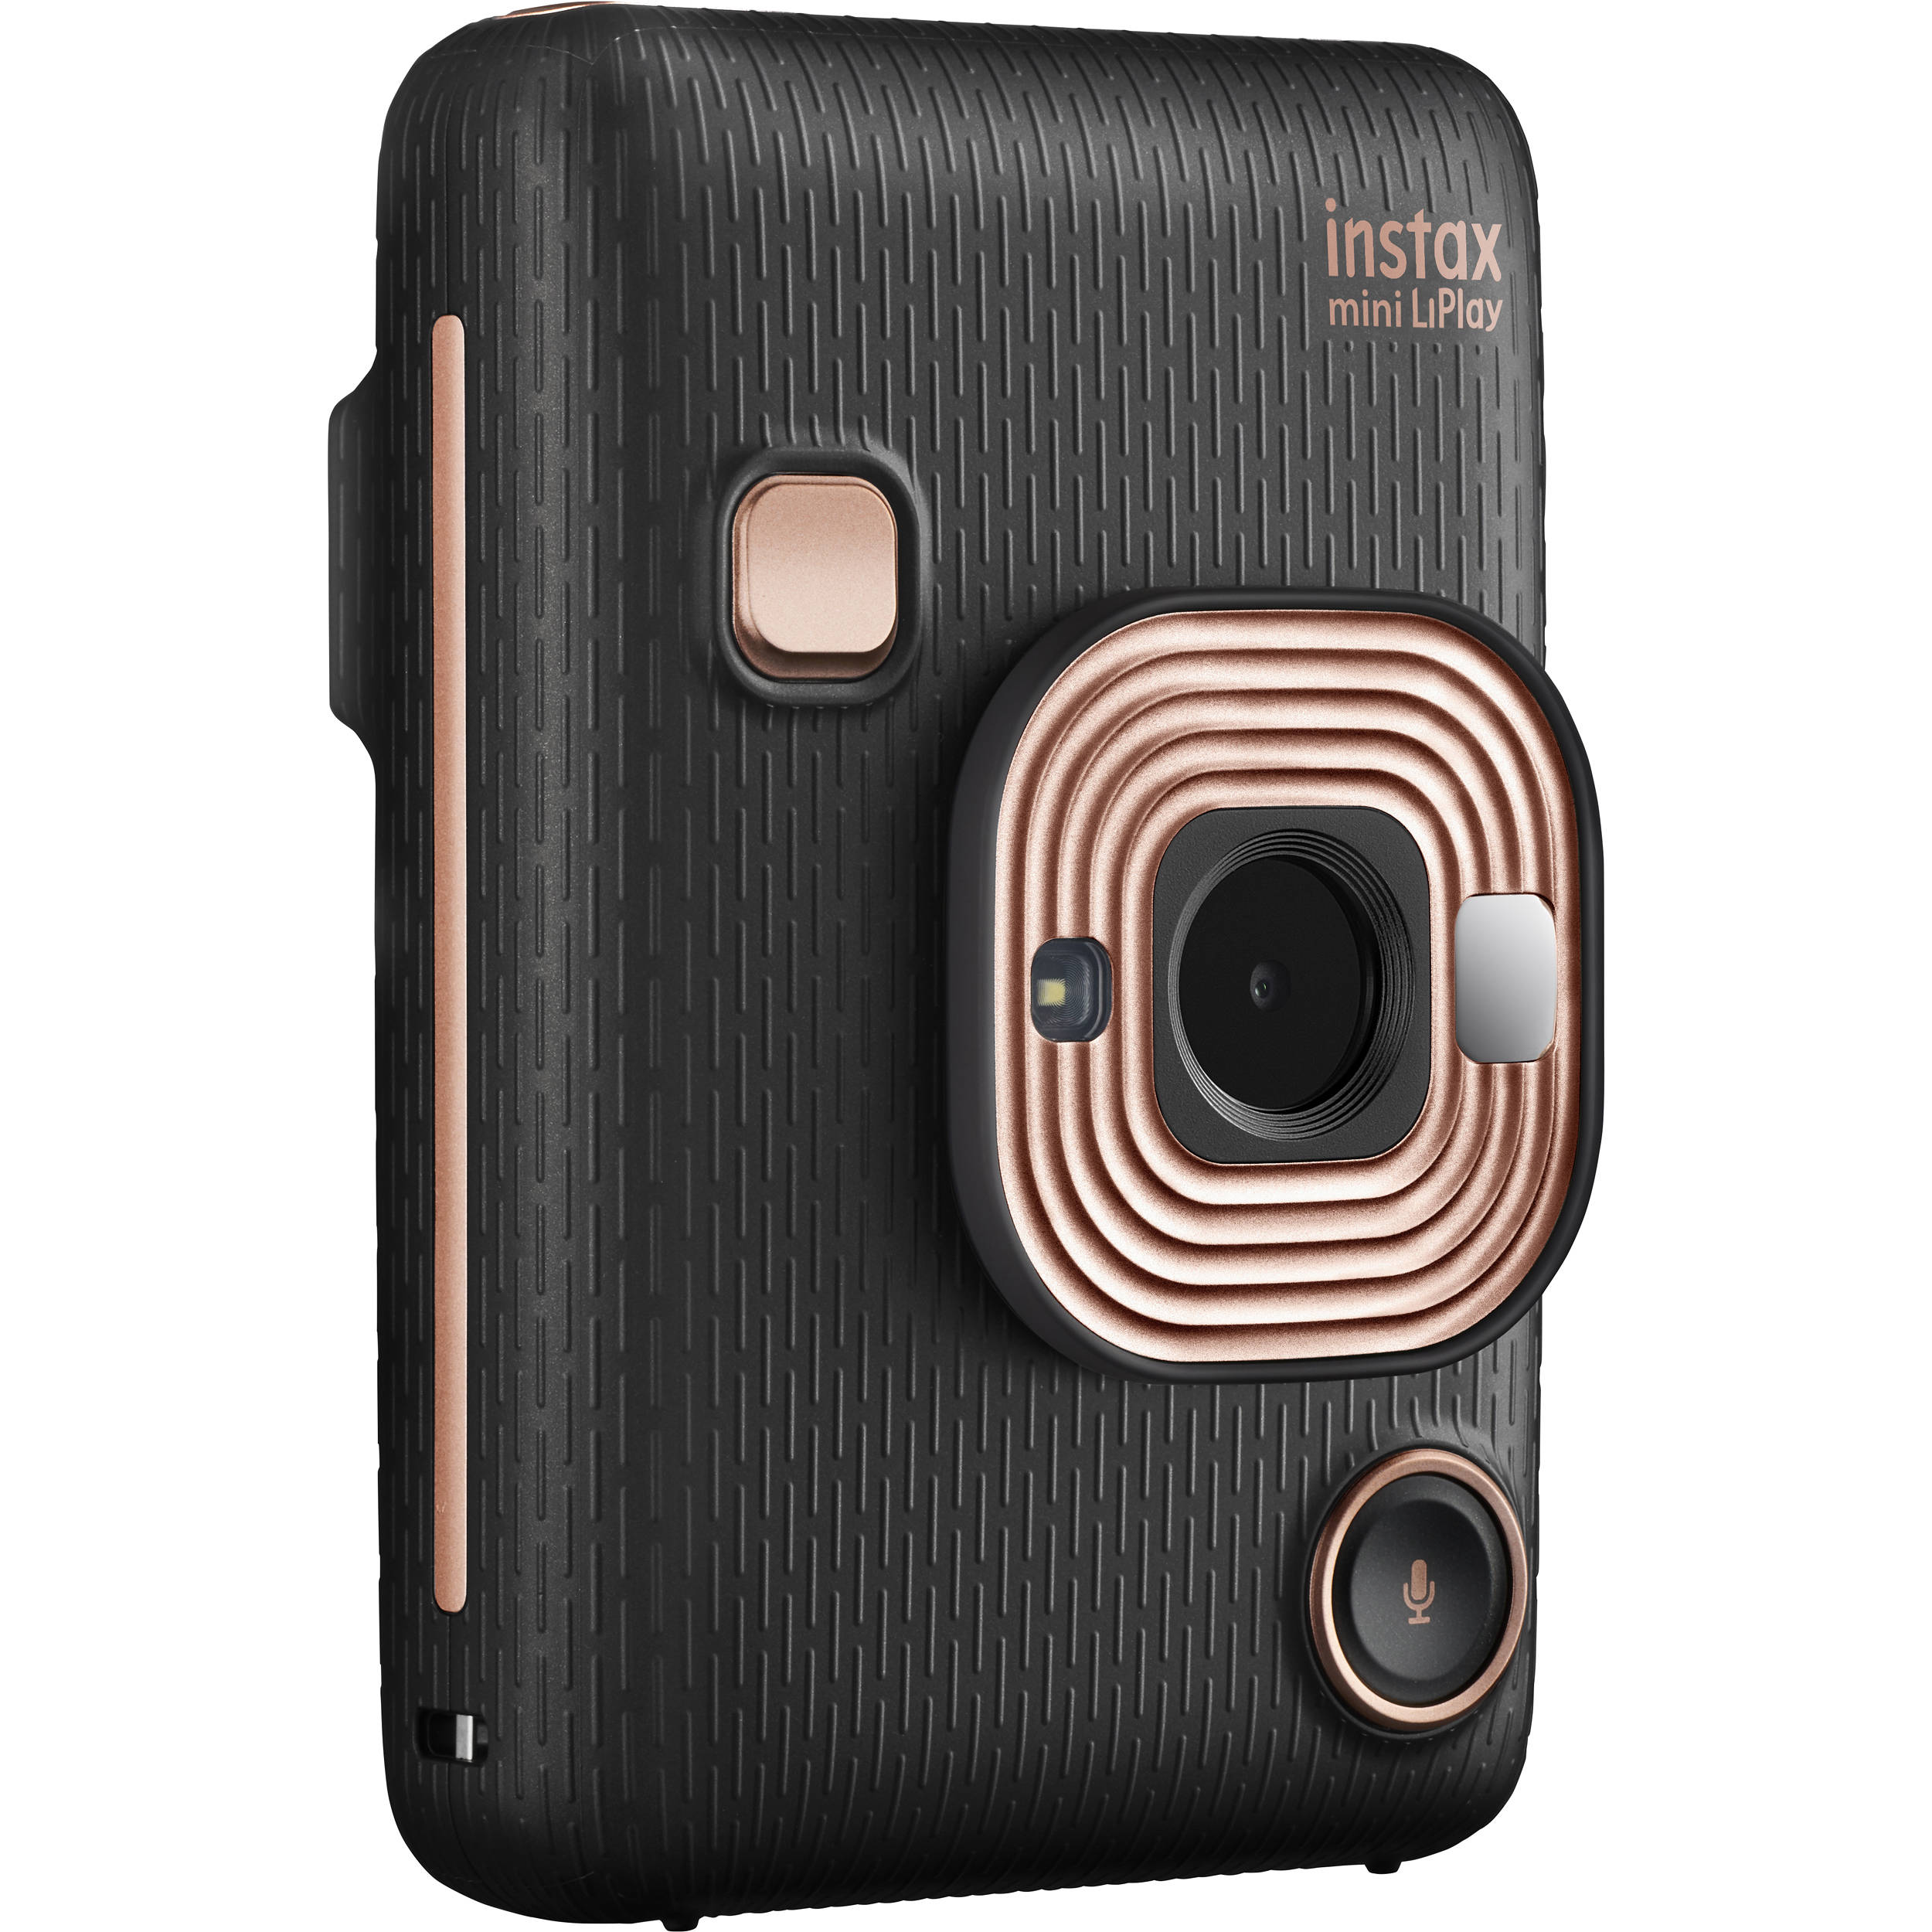 Unleashing Fun with the Mighty LiPlay Hybrid Instant Camera